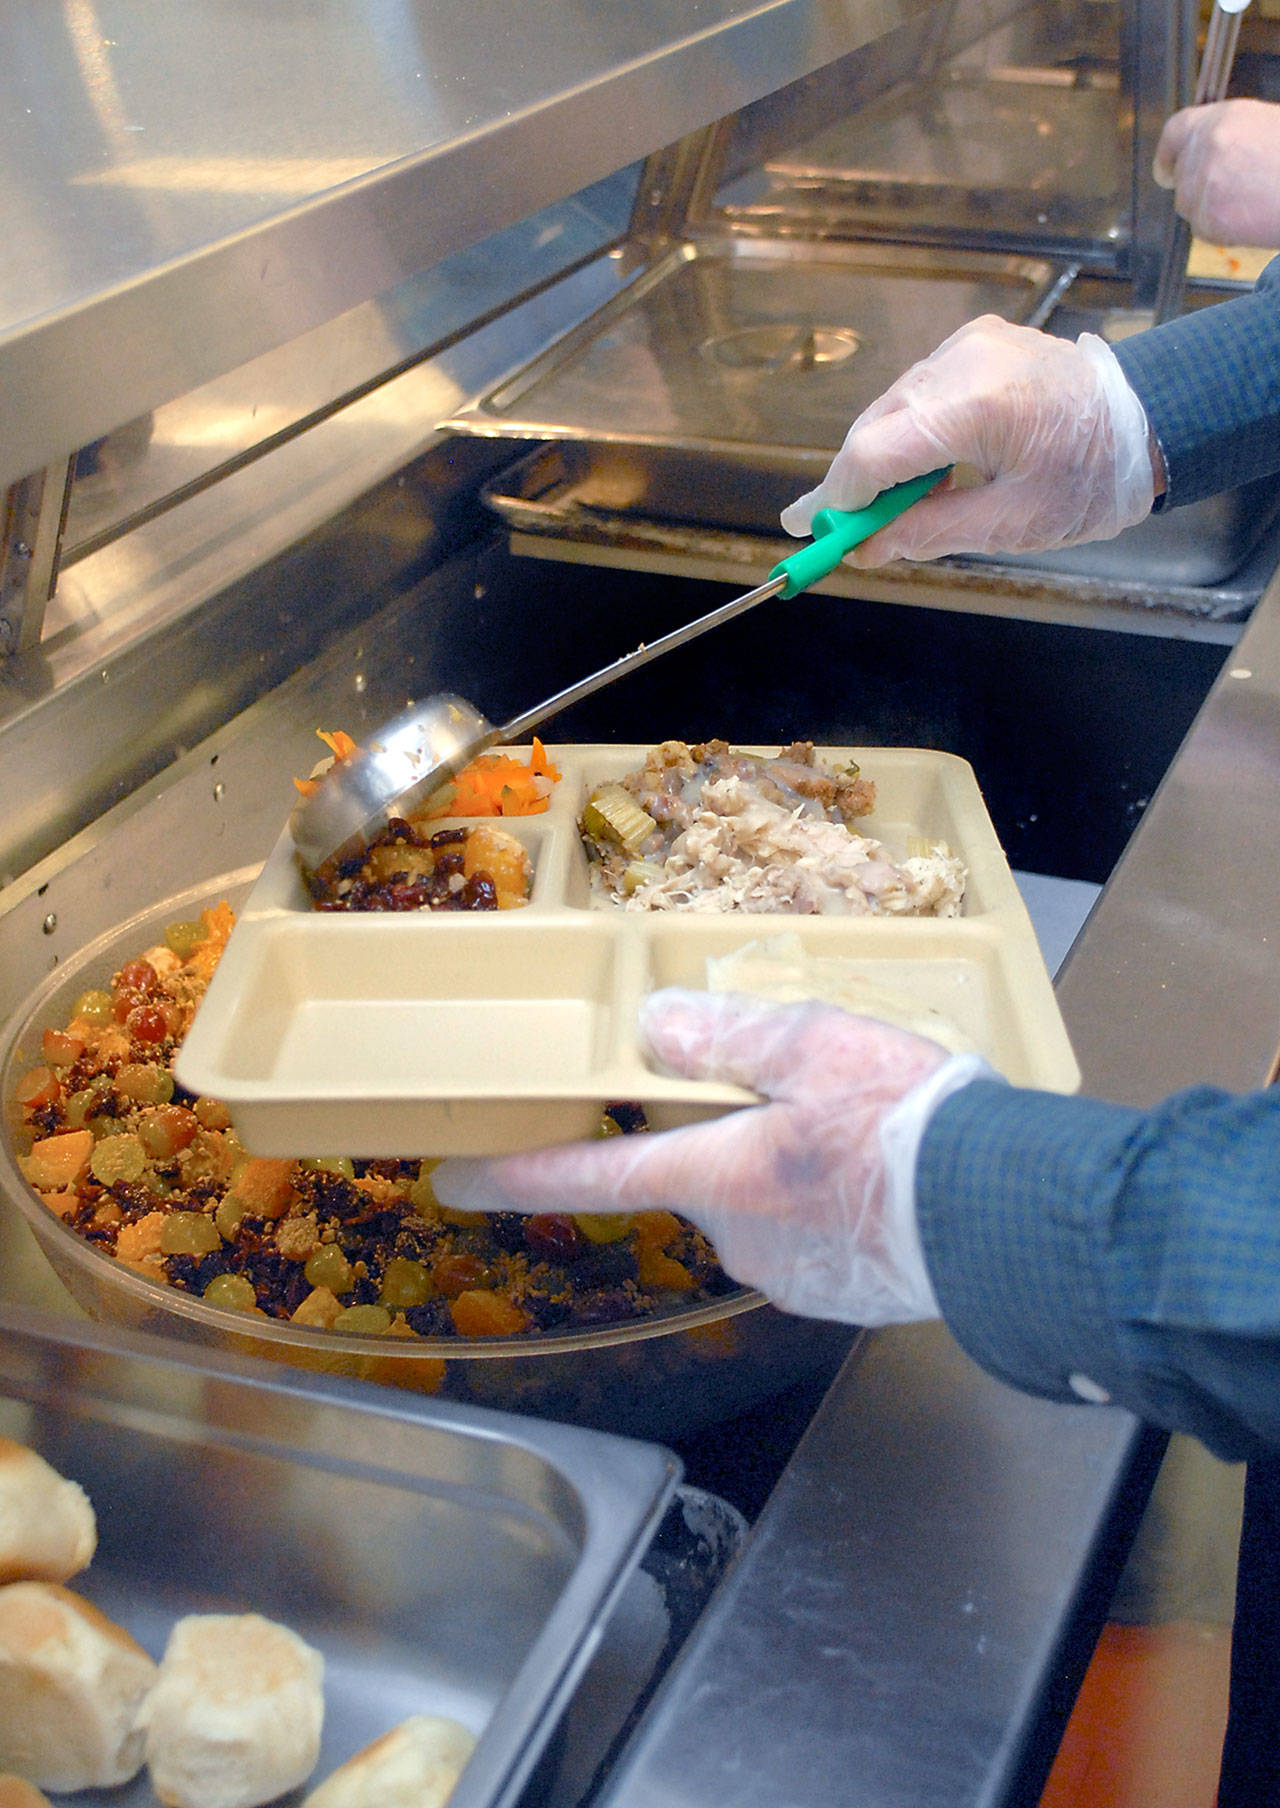 A meal is prepared for participants in Wednesday’s Thanksgiving Eve lunch at the Salvation Army in Port Angeles. (Keith Thorpe/Peninsula Daily News)